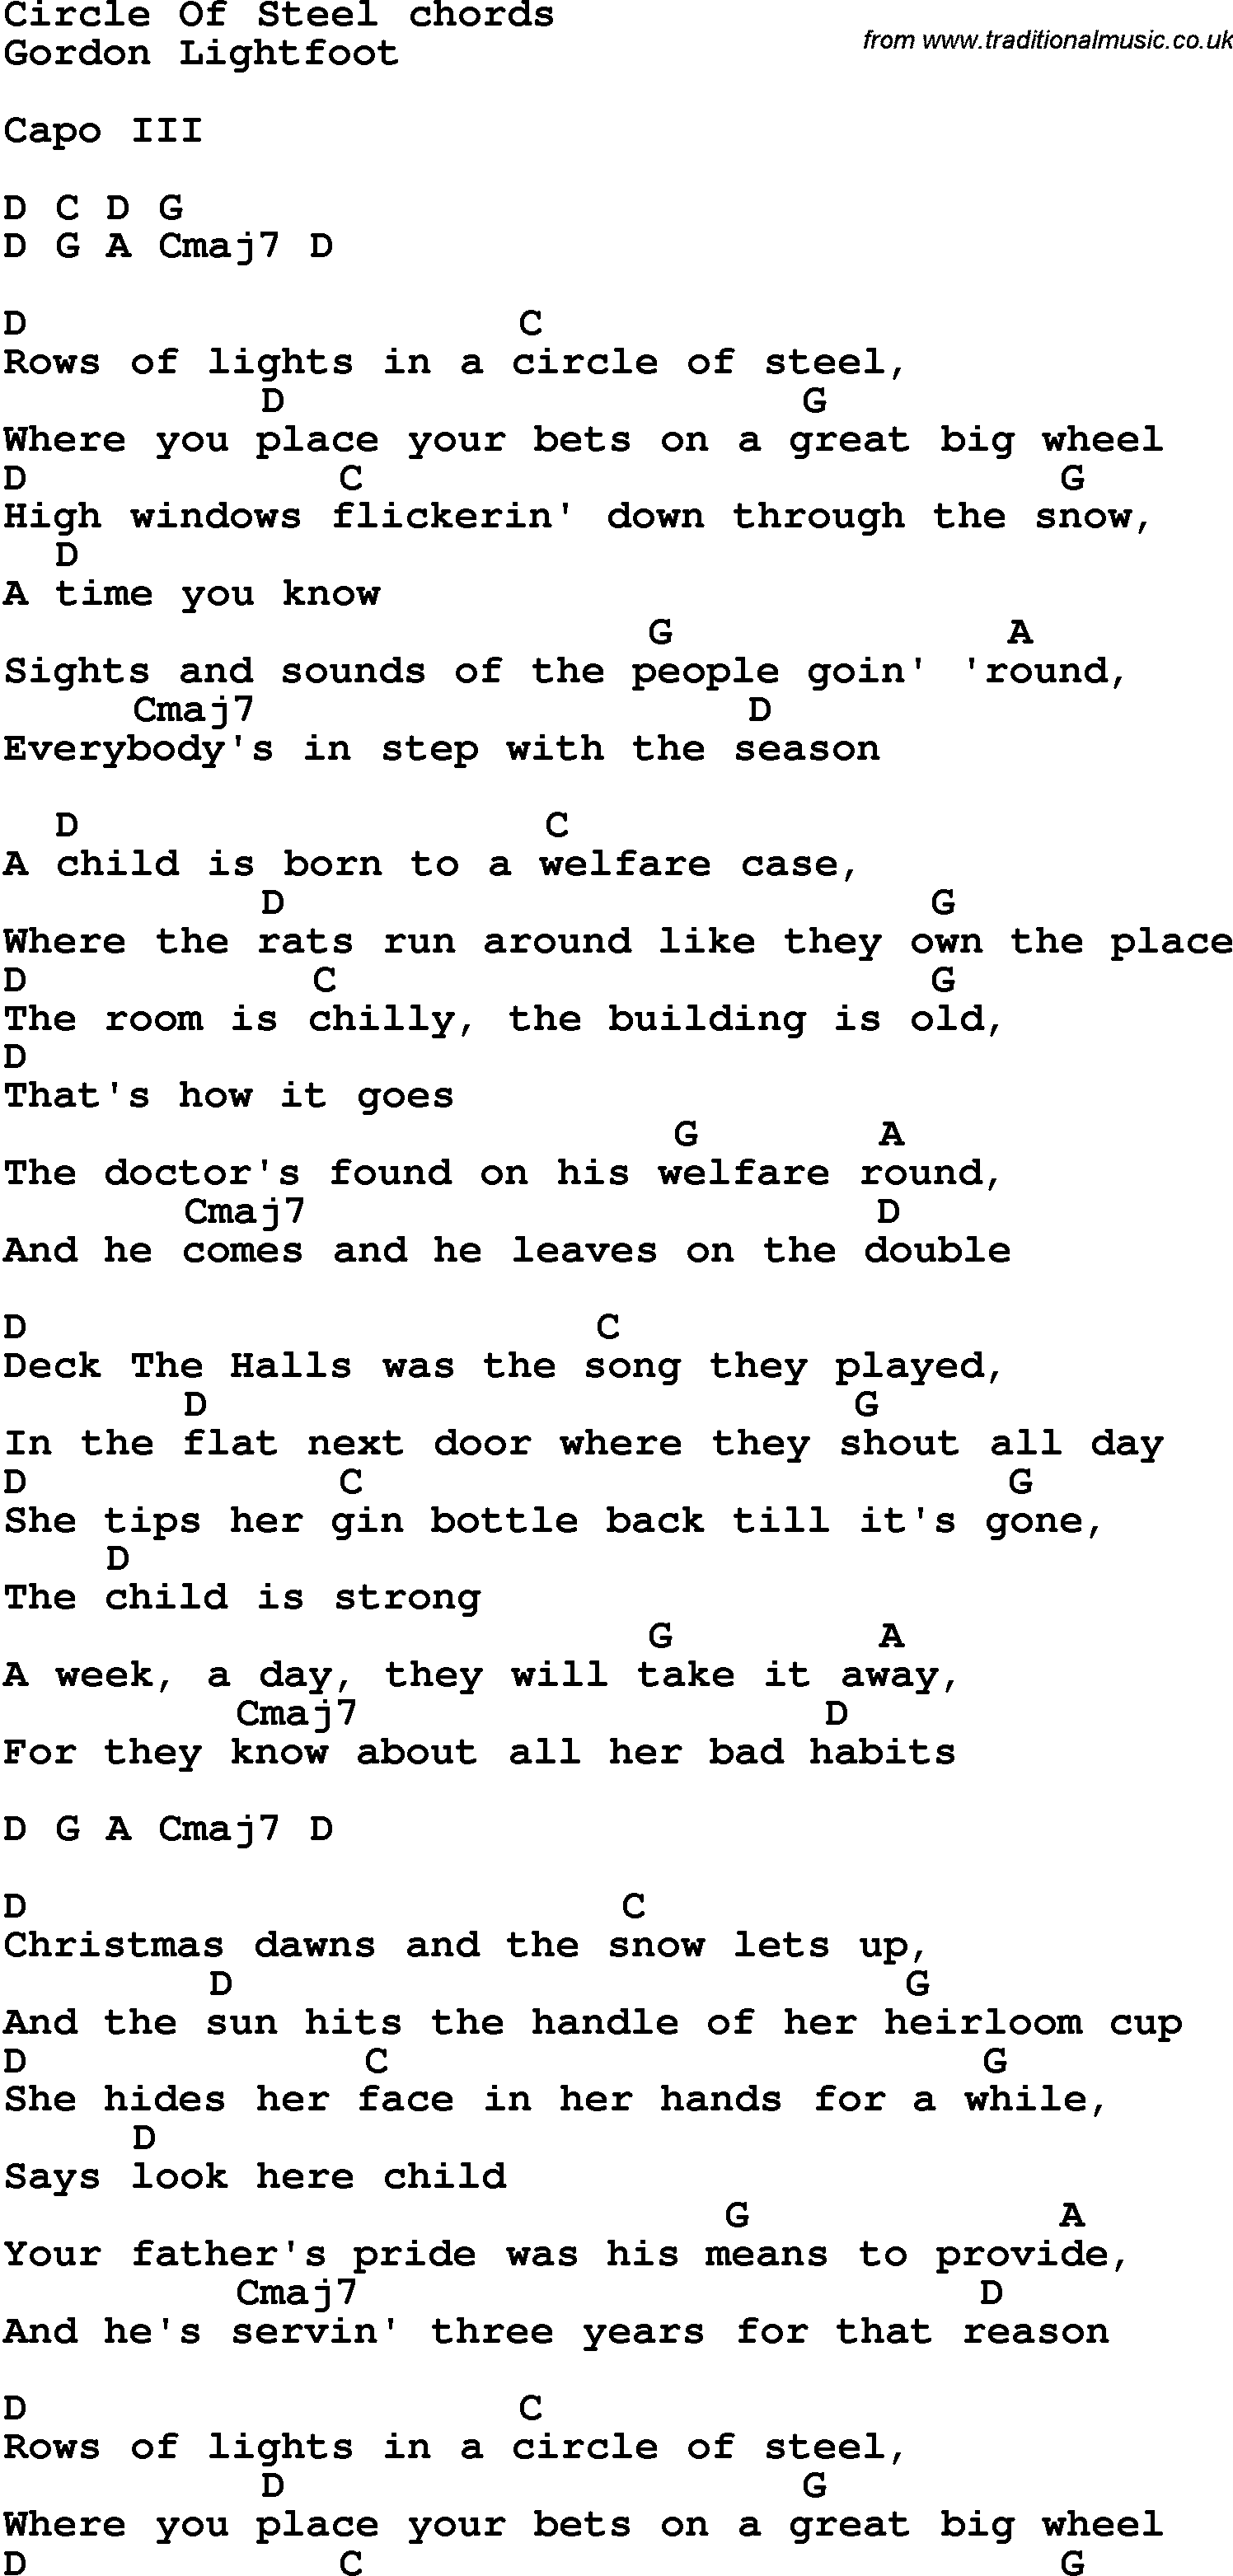 Song Lyrics with guitar chords for Circle Of Steel